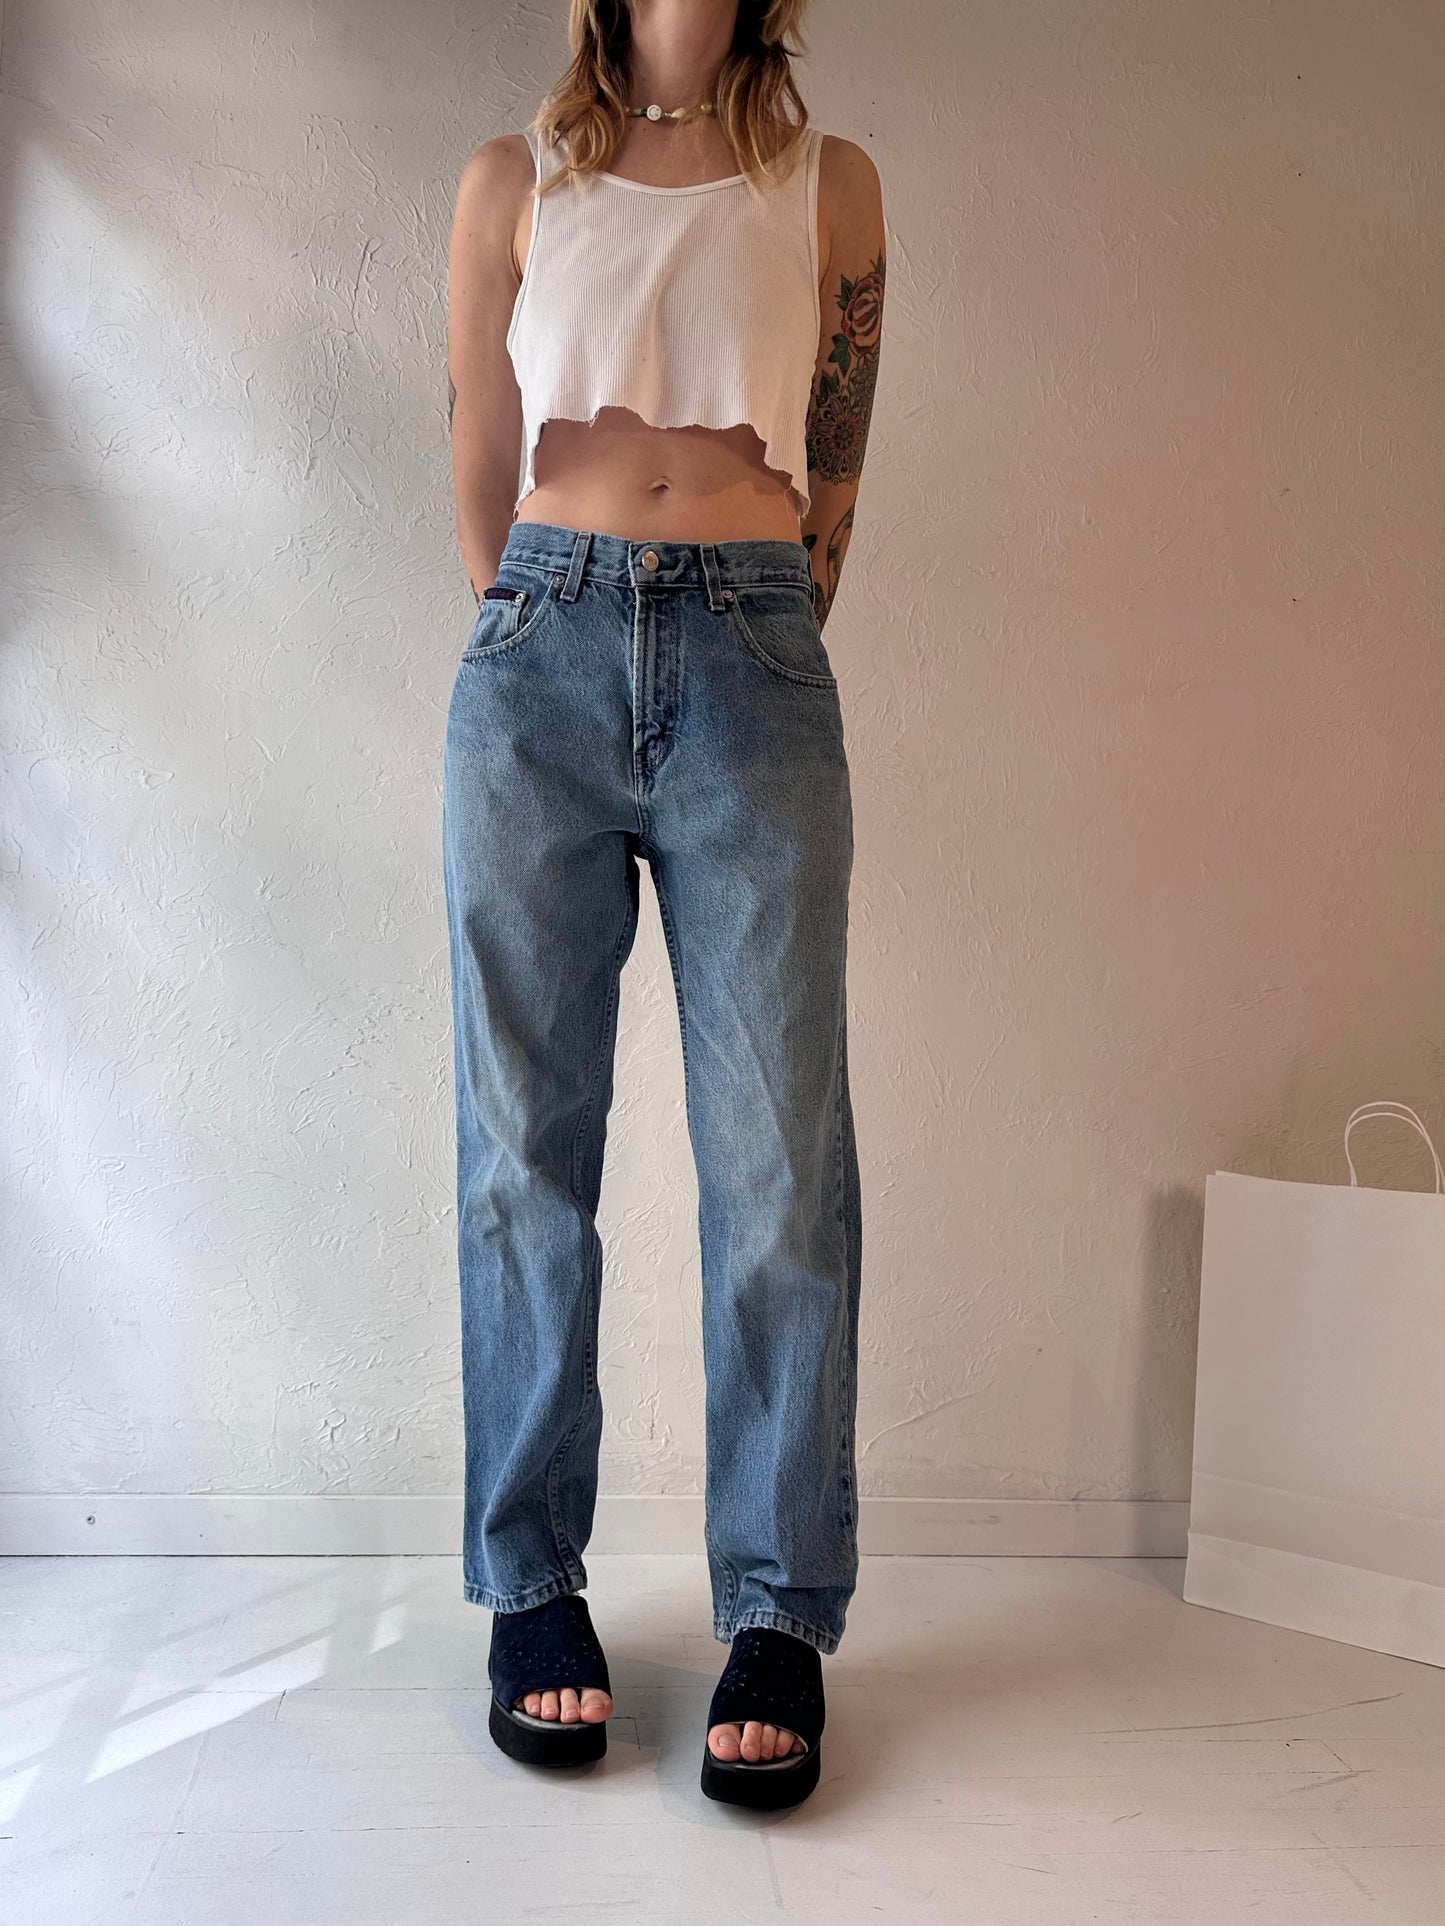 90s 'Tommy Hilfiger' Jeans / Made in Canada / 28"